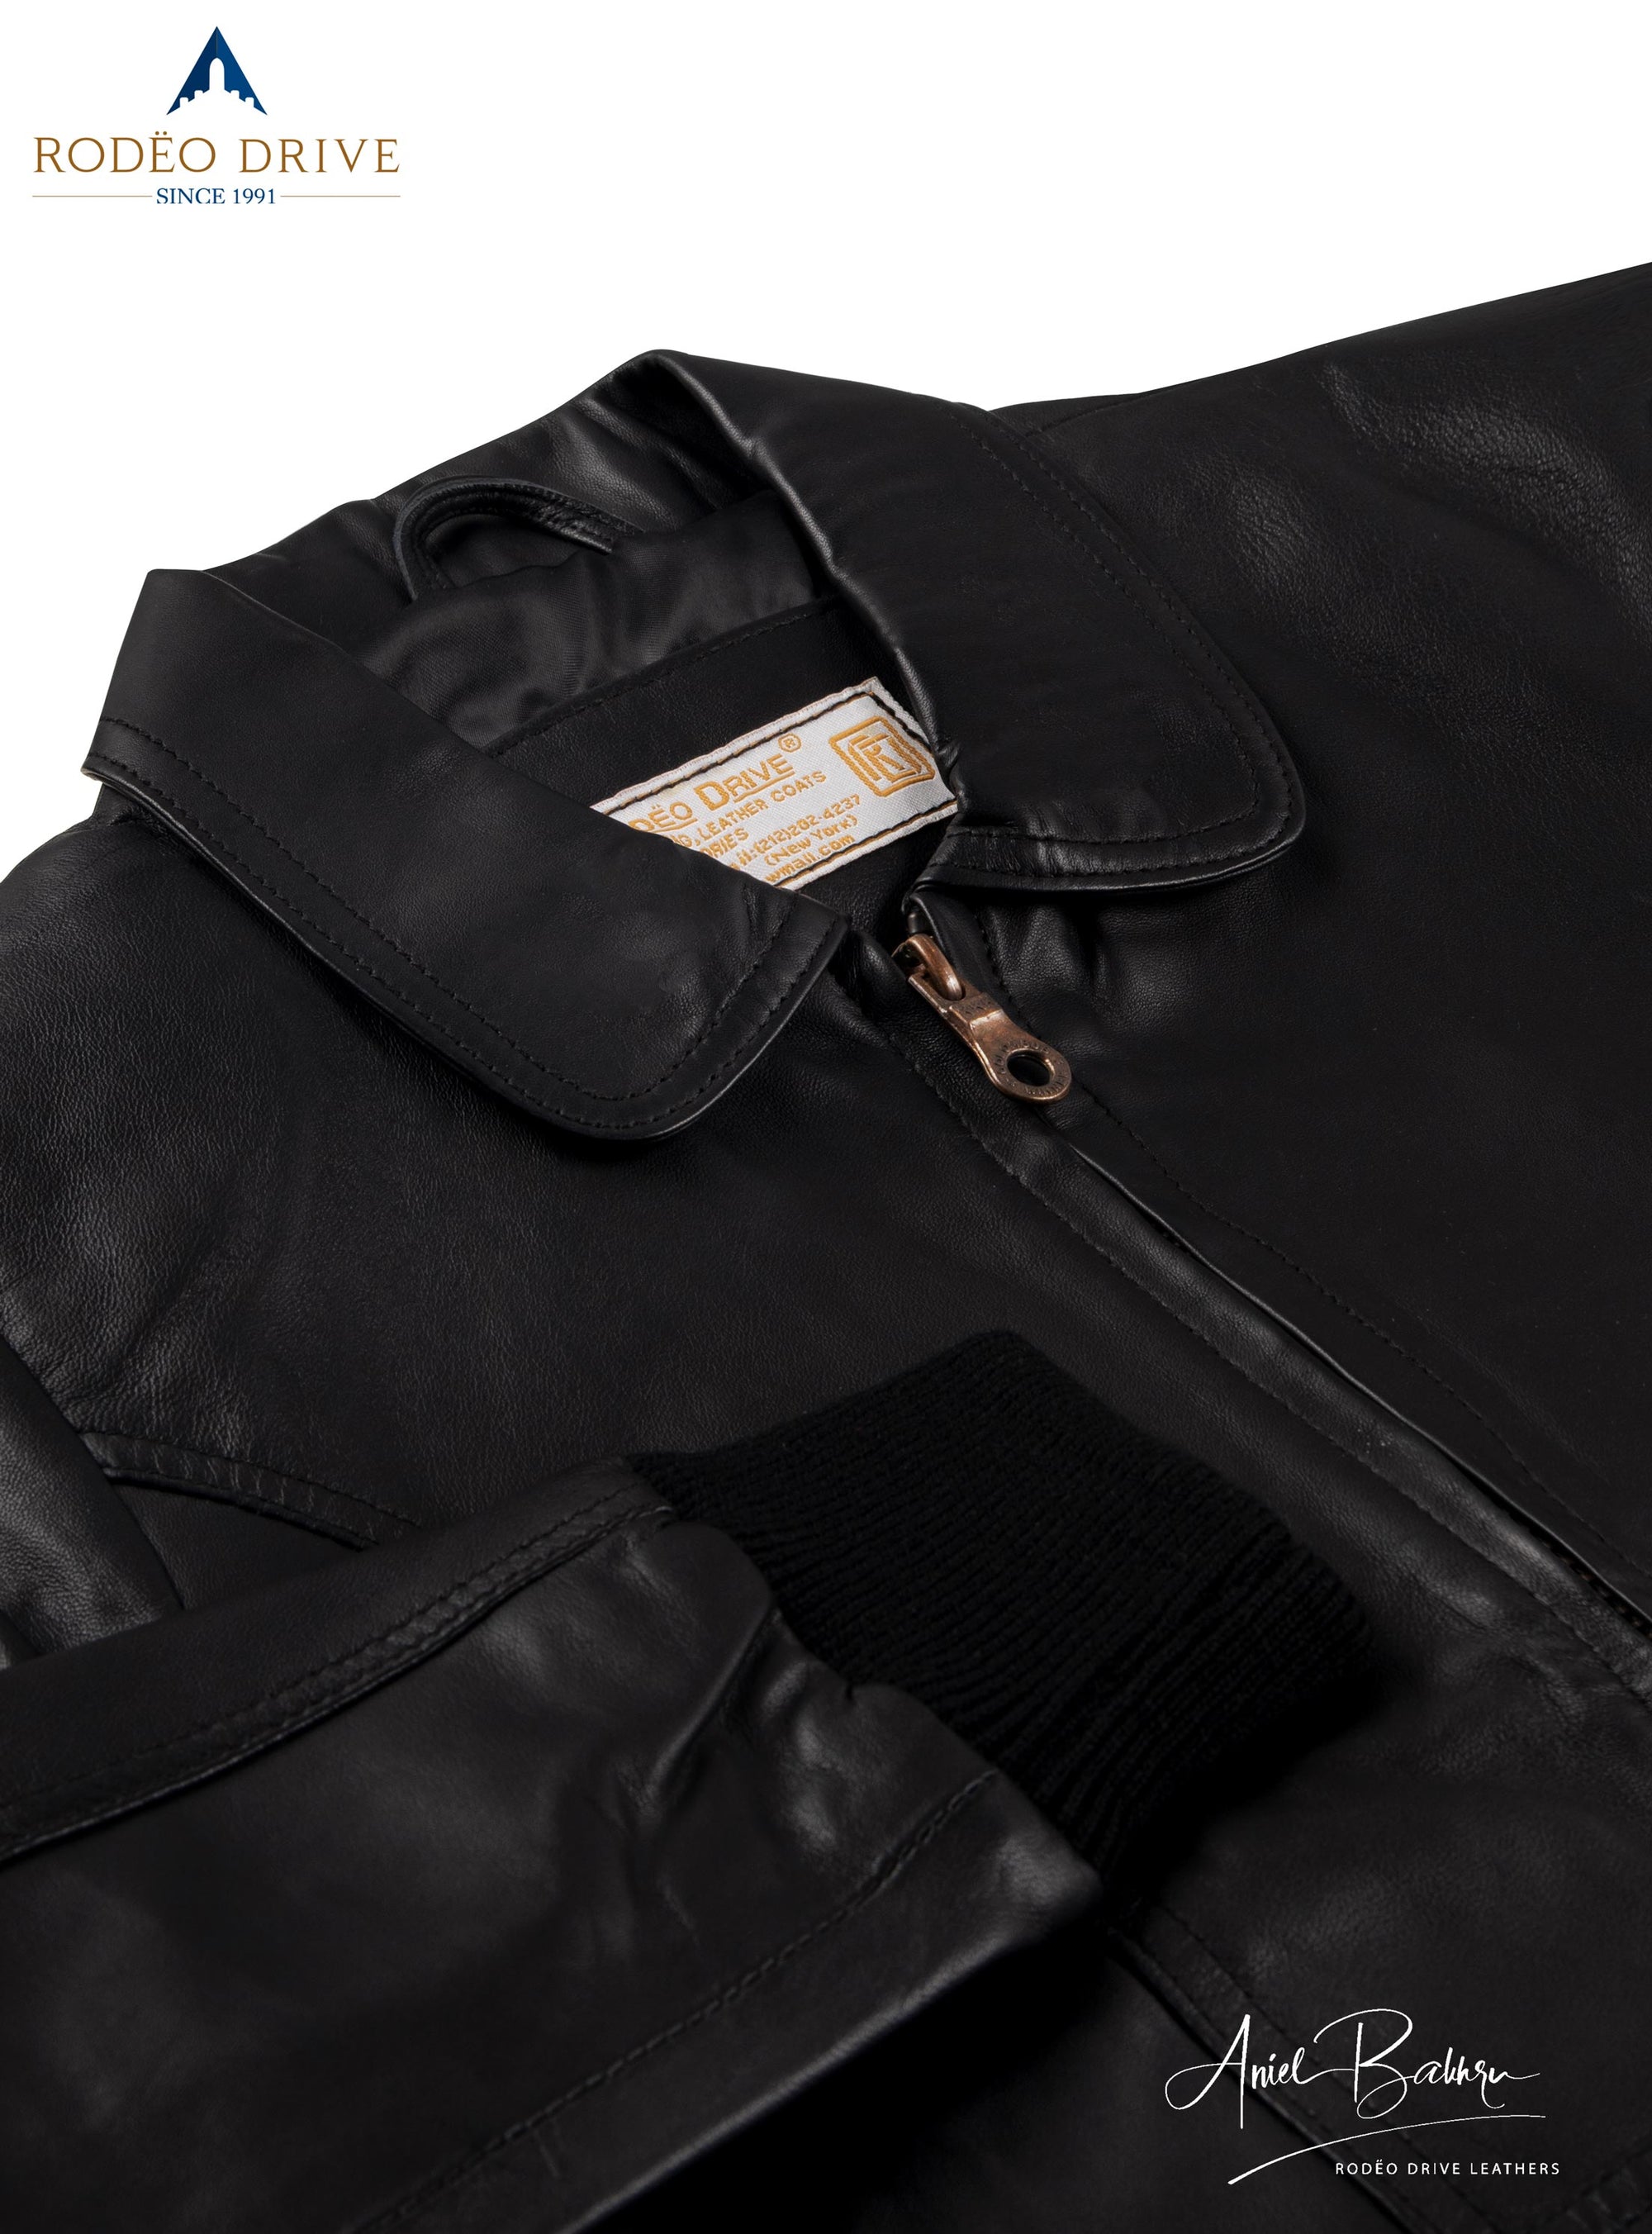 close up view of Womens bomber jacket